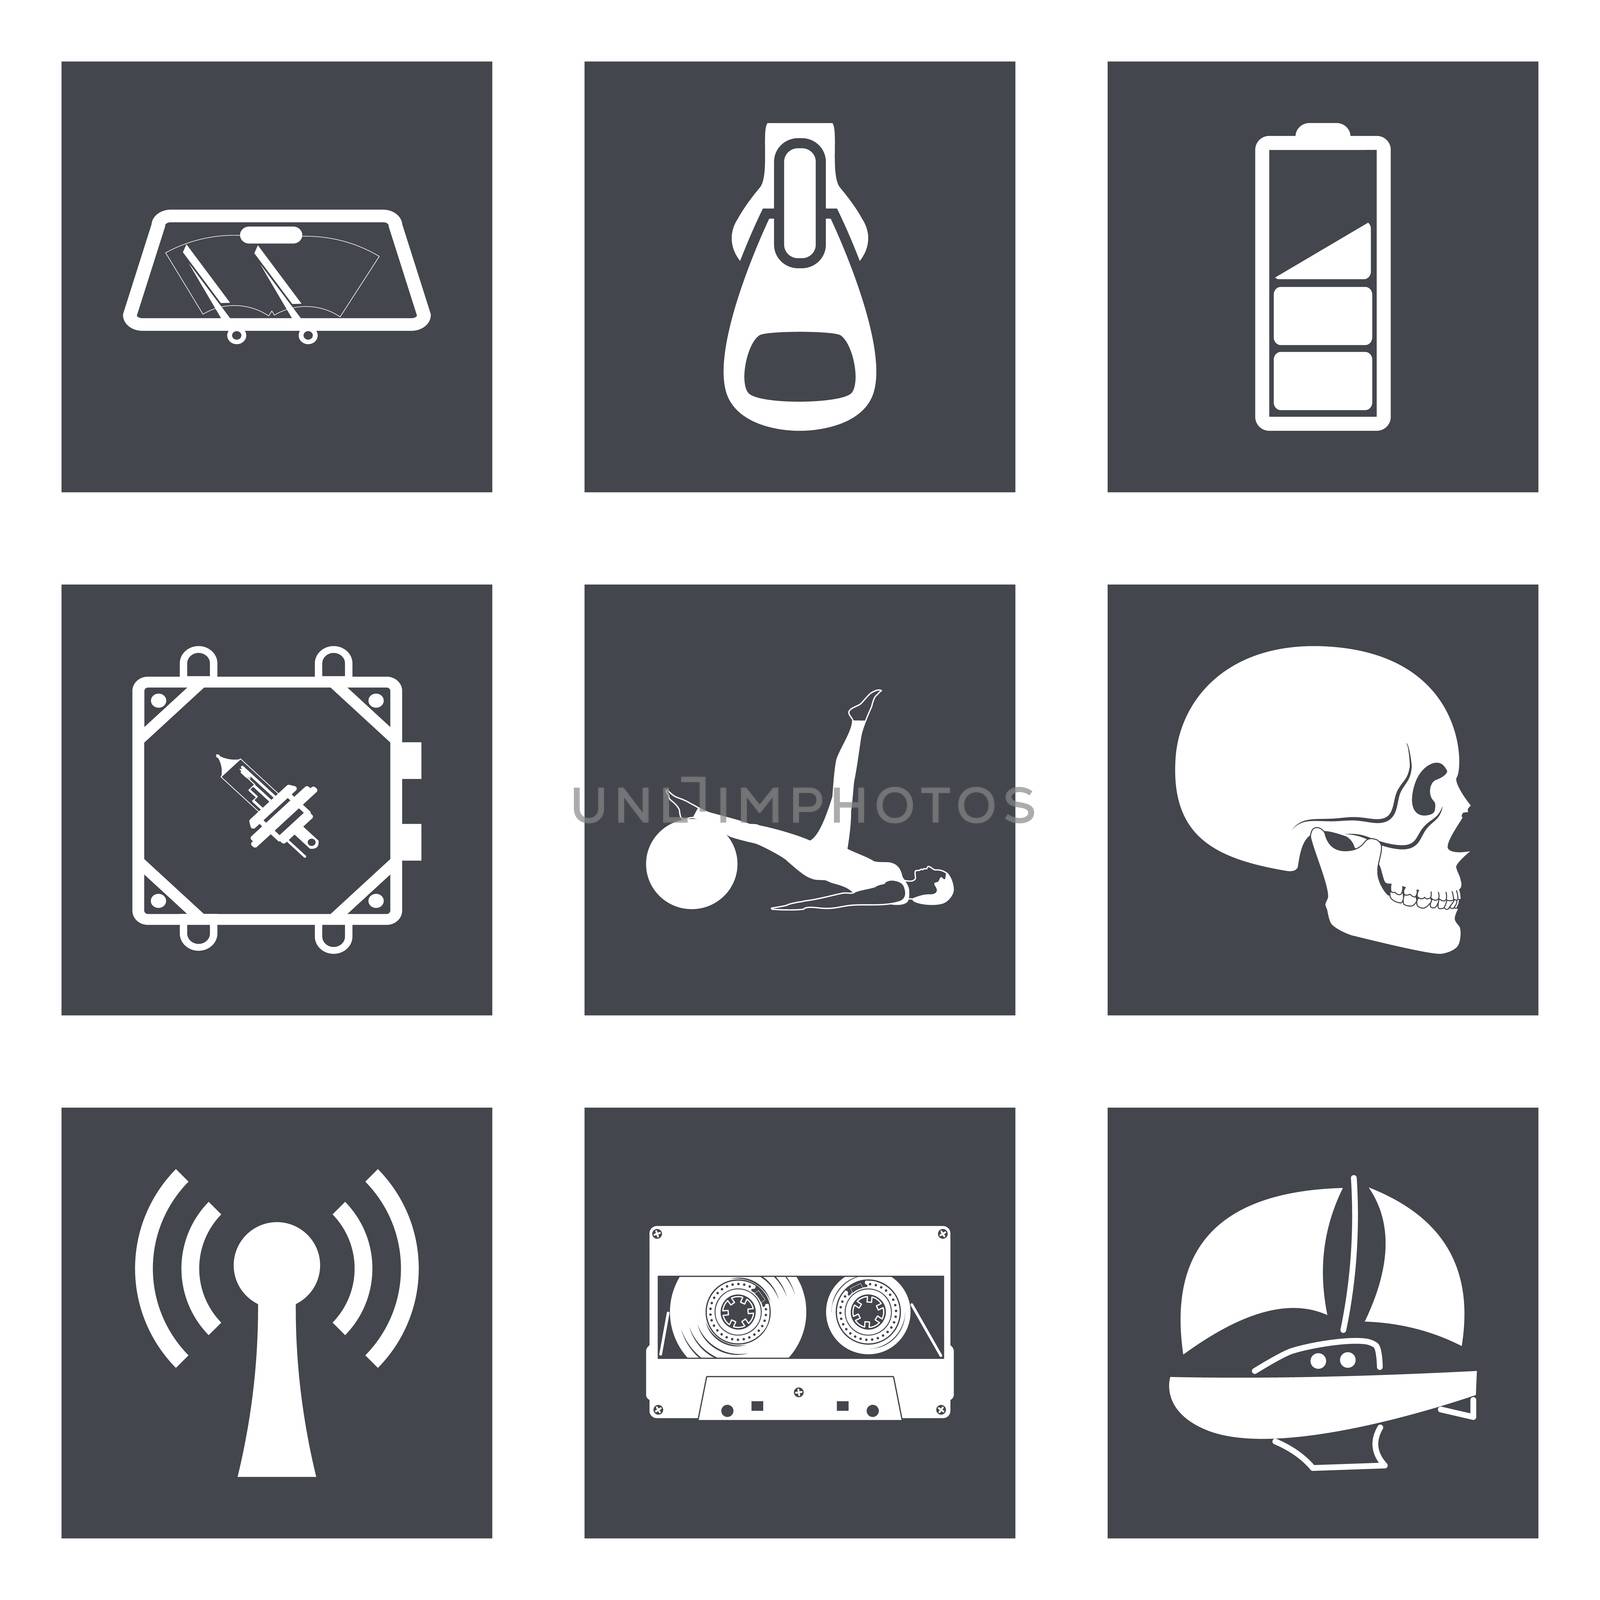 Icons for Web Design and Mobile Applications set 3. Vector illustration.